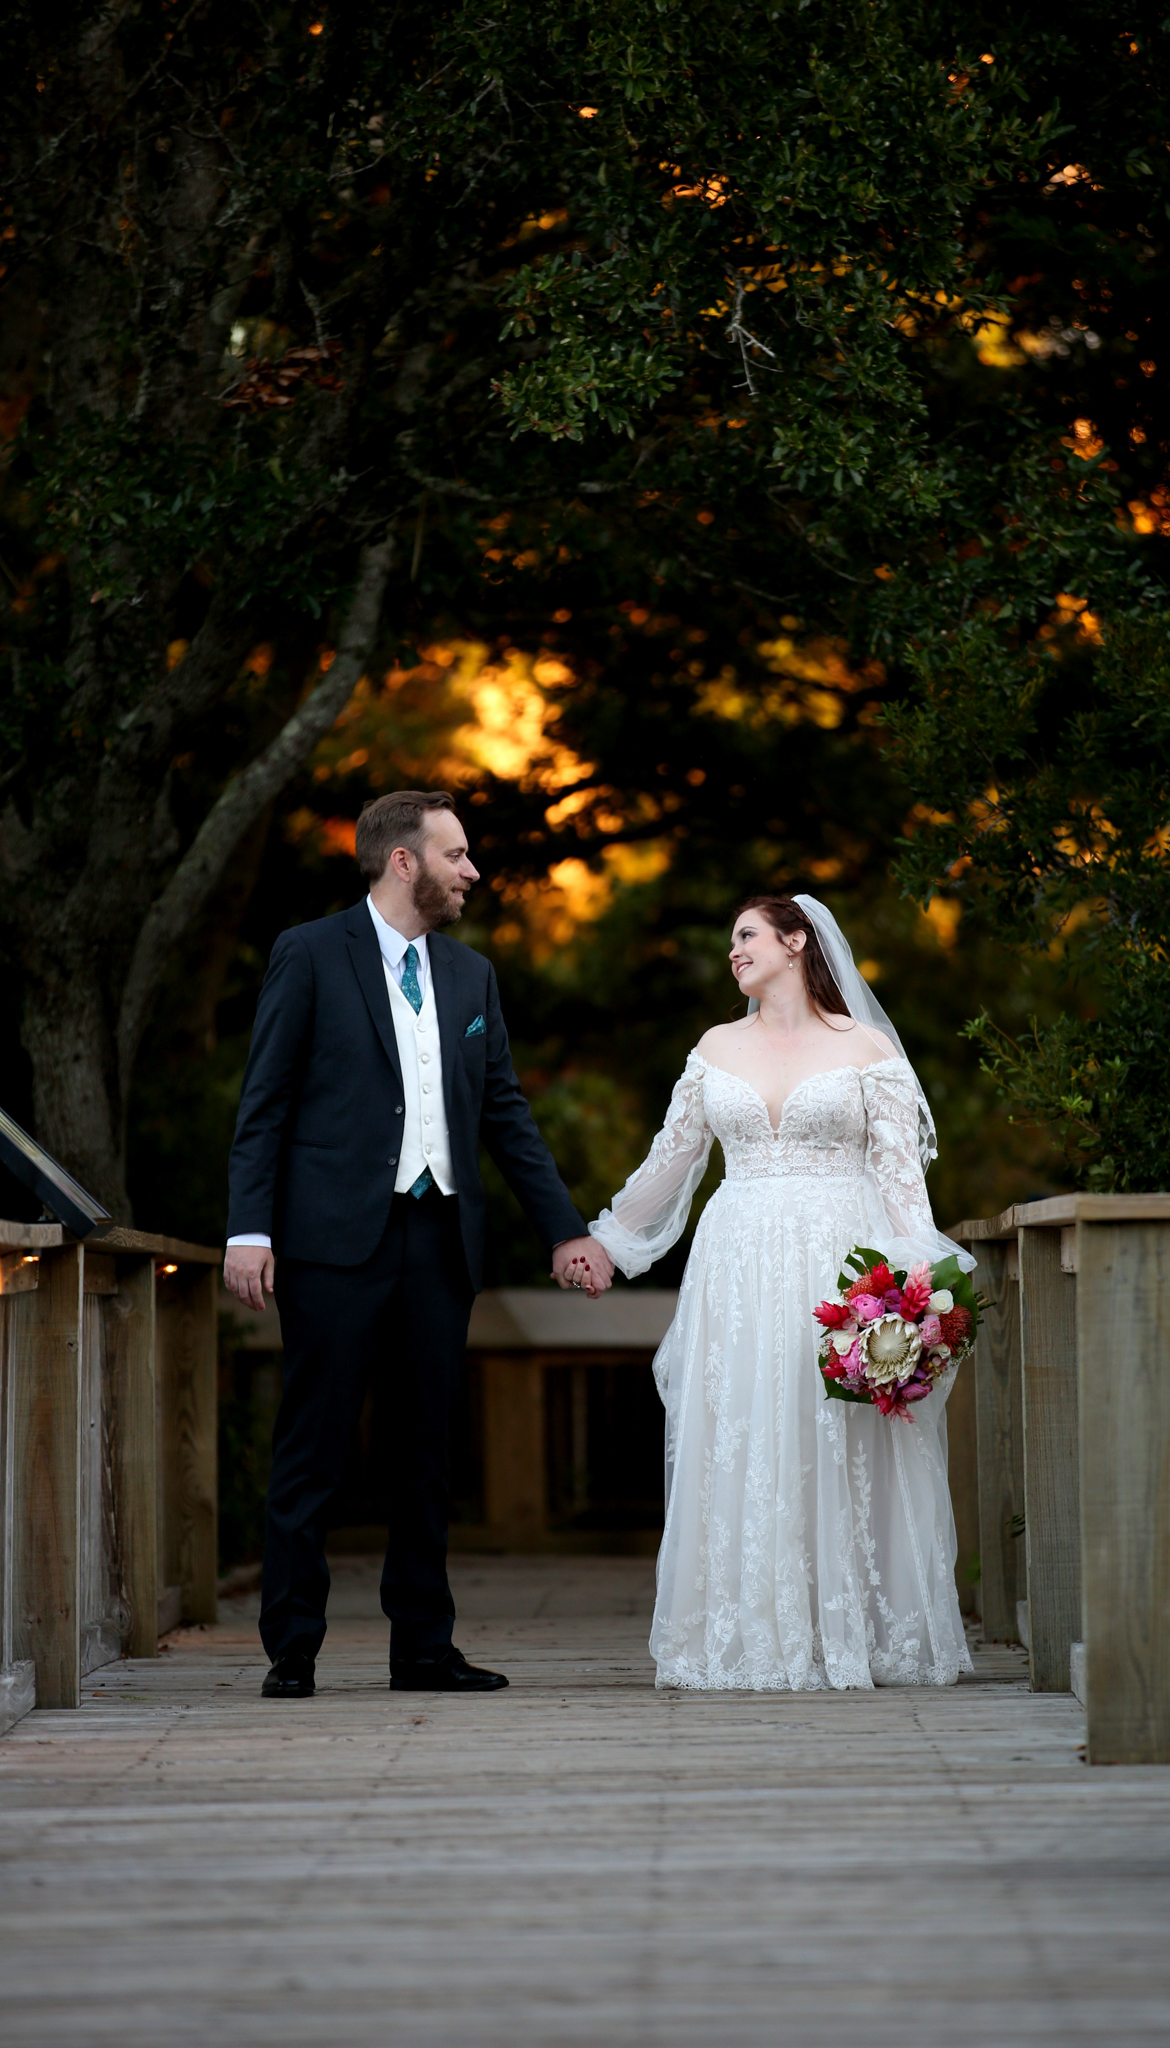 The Sunsets in Wilmington are perfect for an outdoor Wedding.